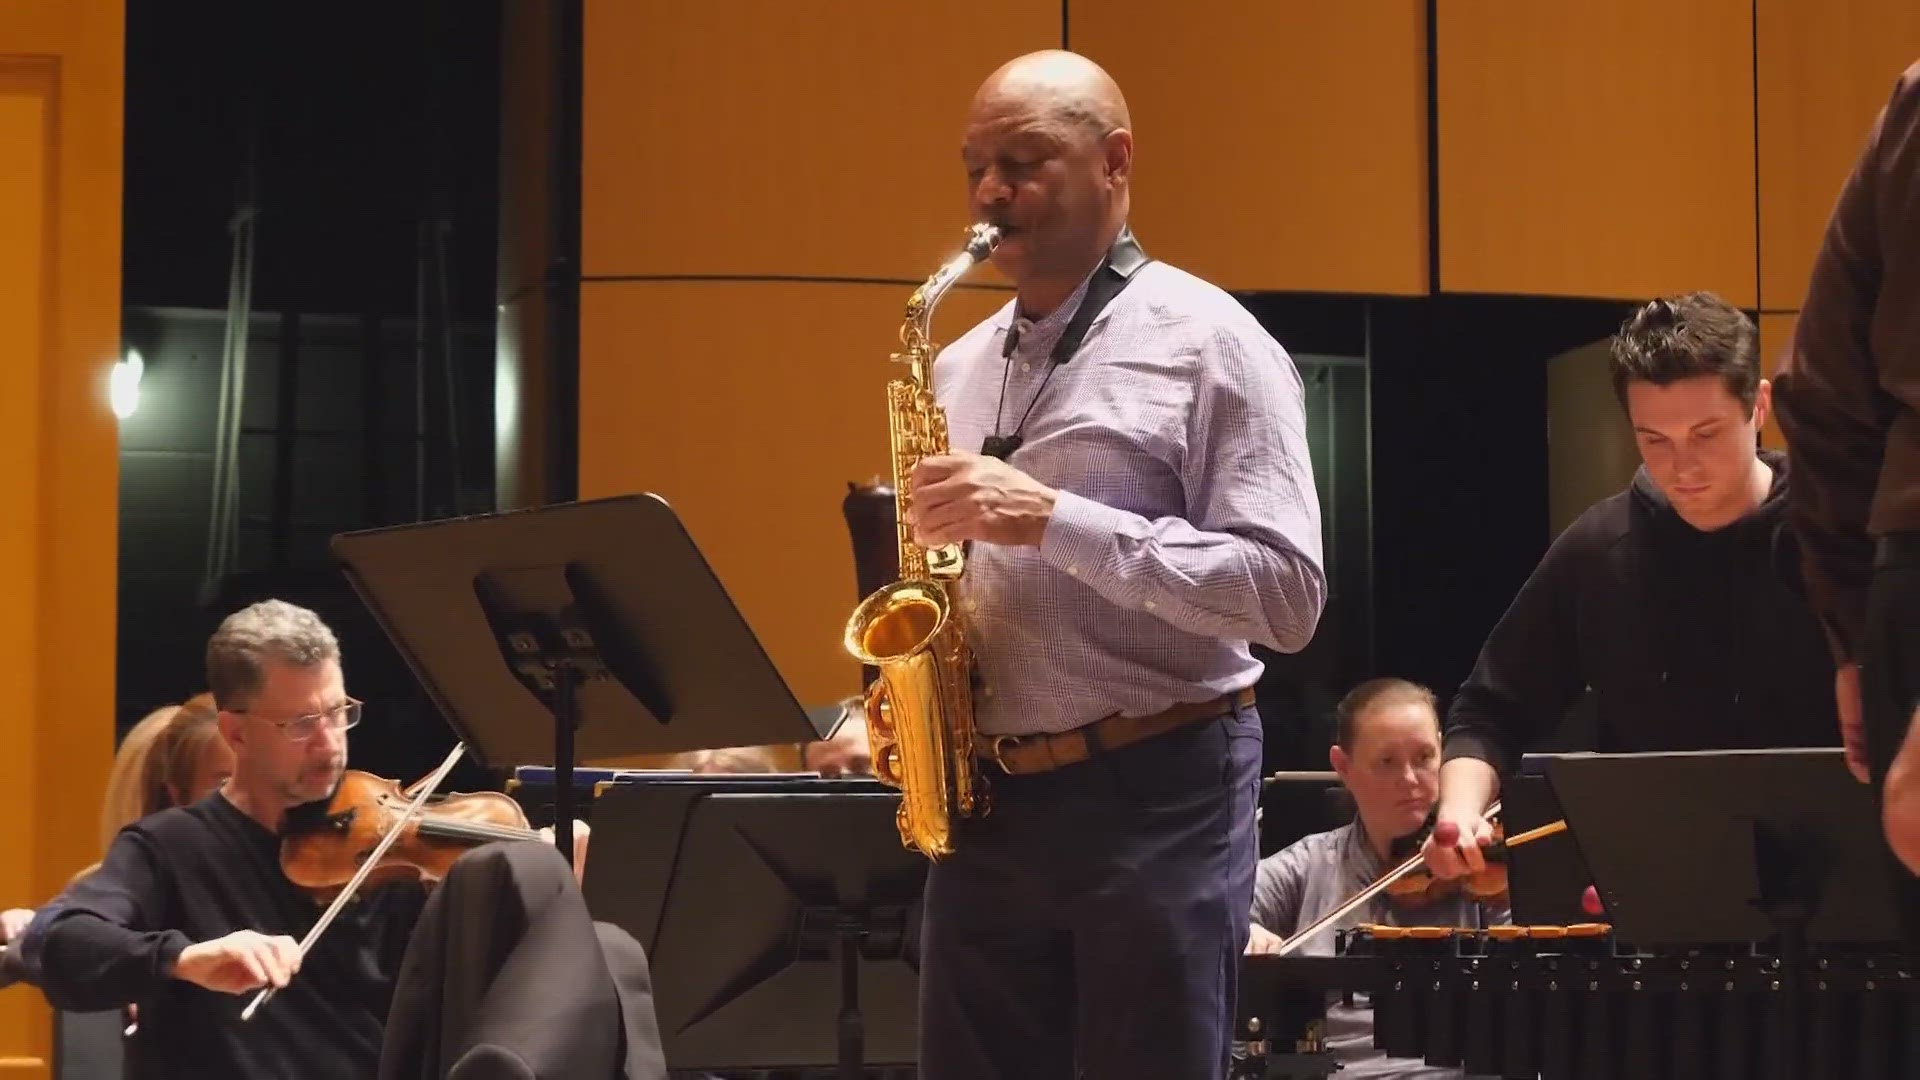 World-renowned saxophonist Branford Marsalis will join the orchestra Saturday evening for a one-night-only experience.